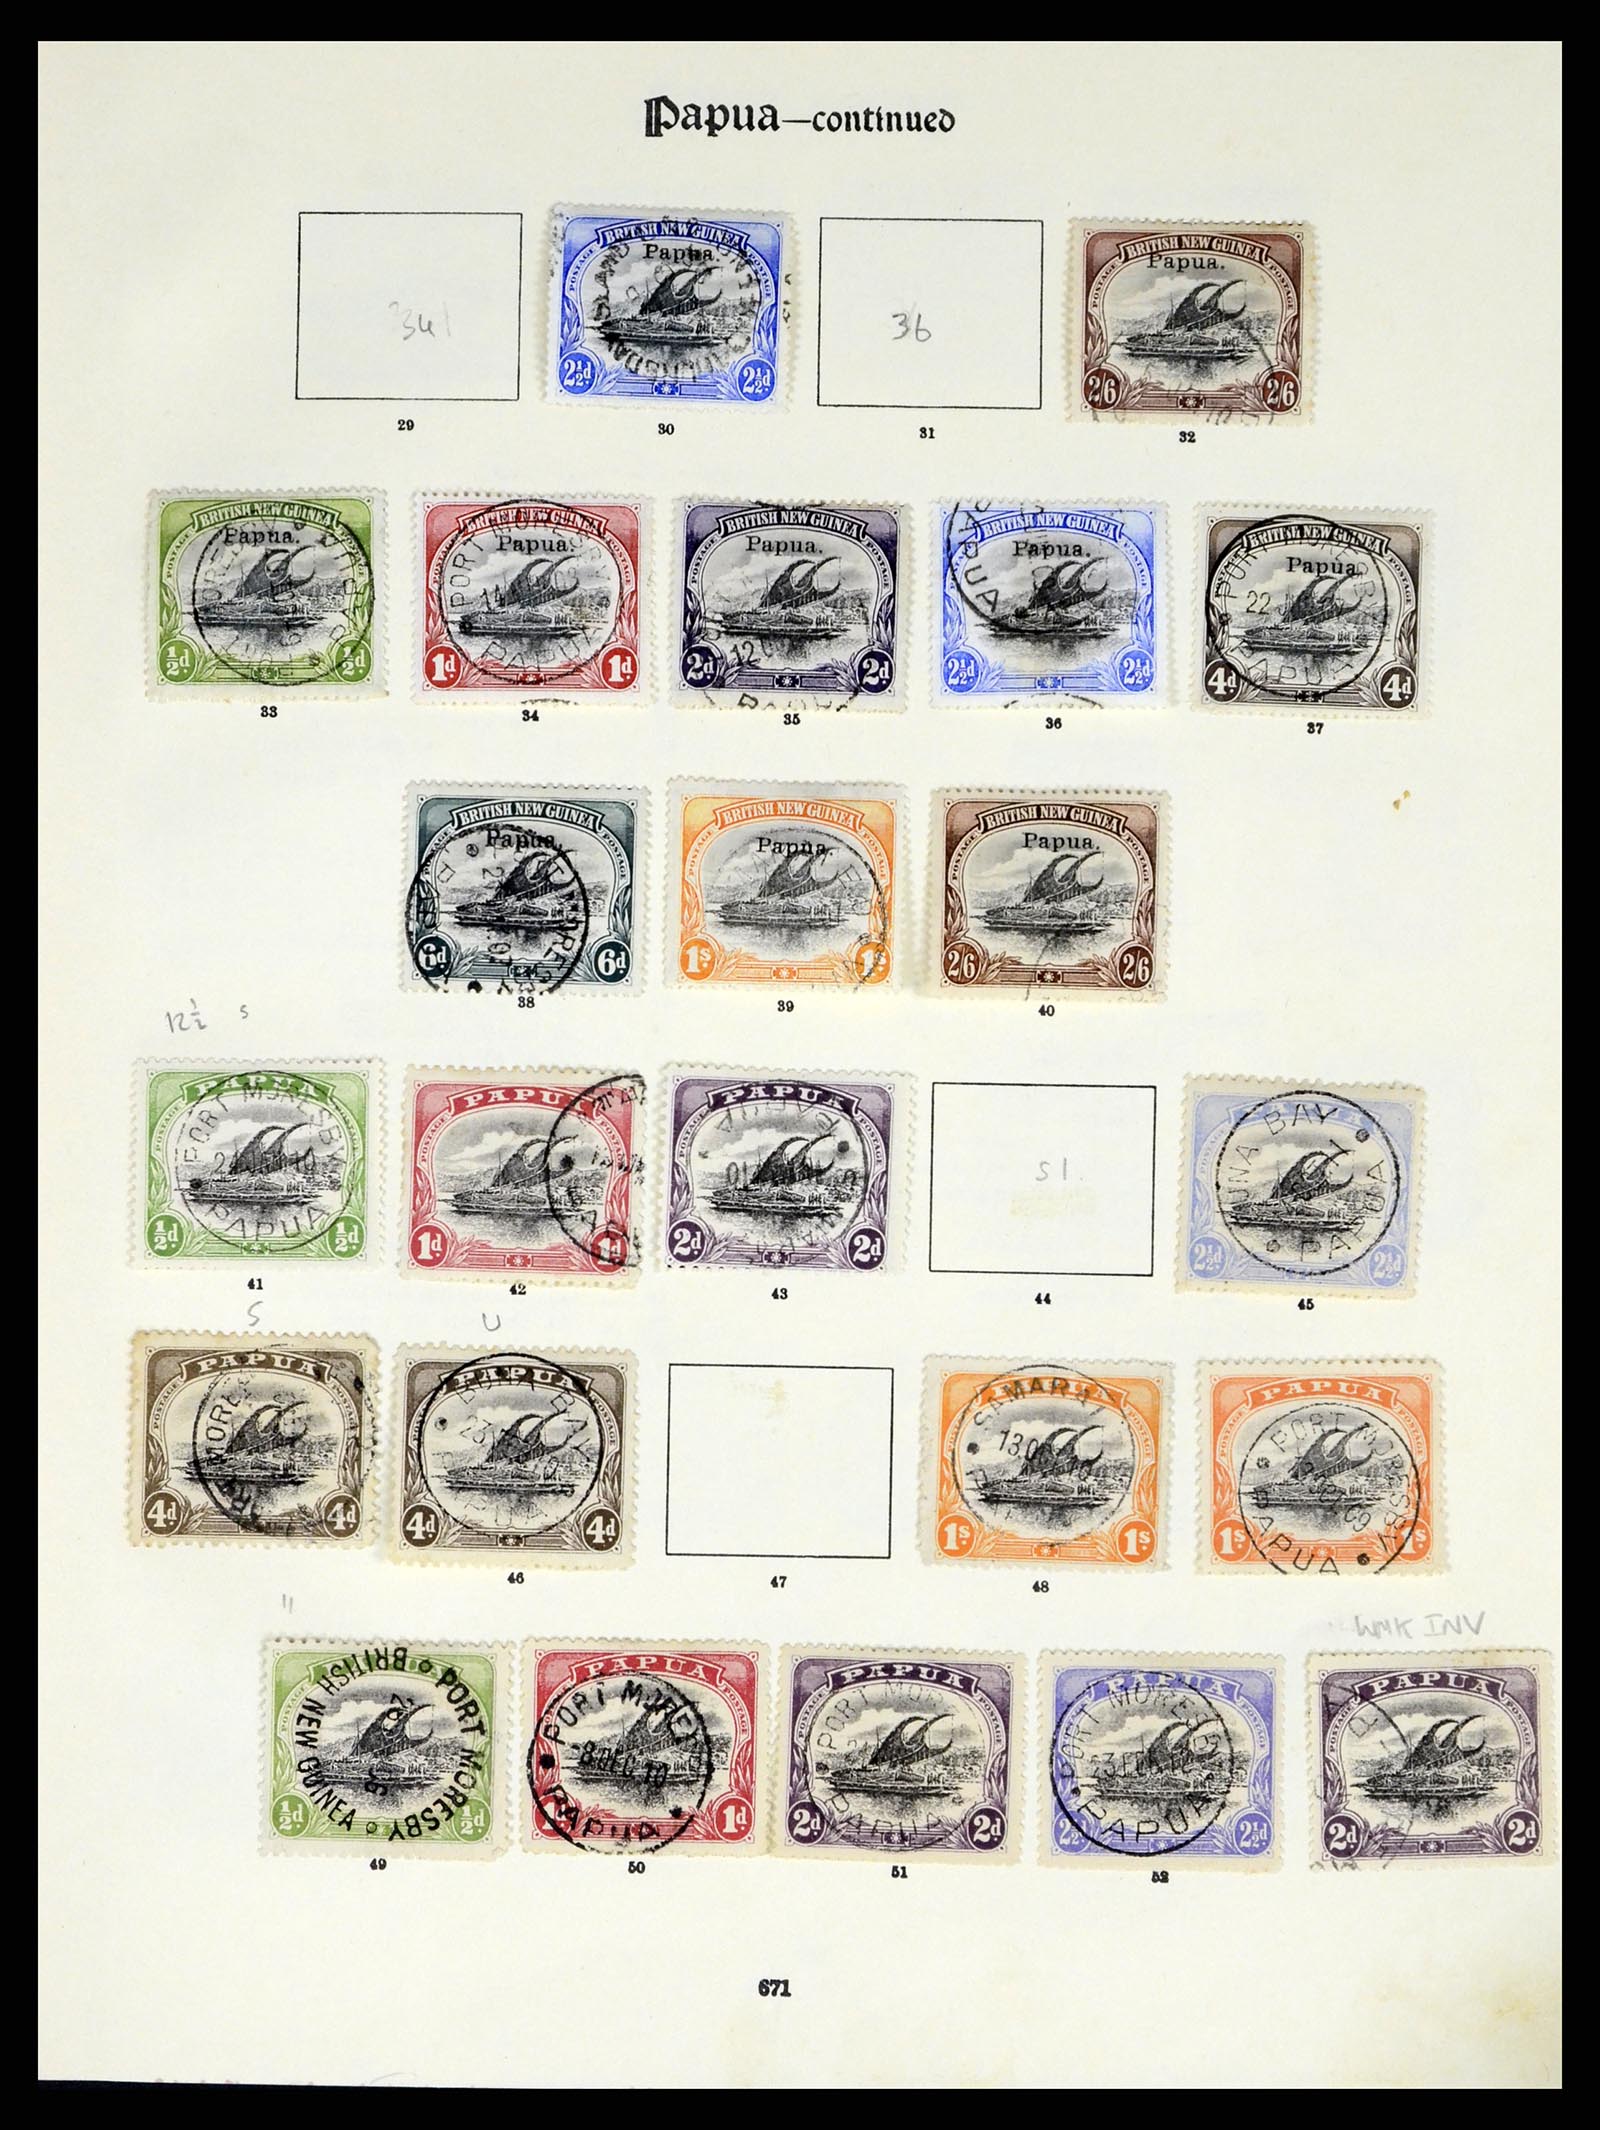 37579 027 - Stamp collection 37579 Papua 1901-1940. 